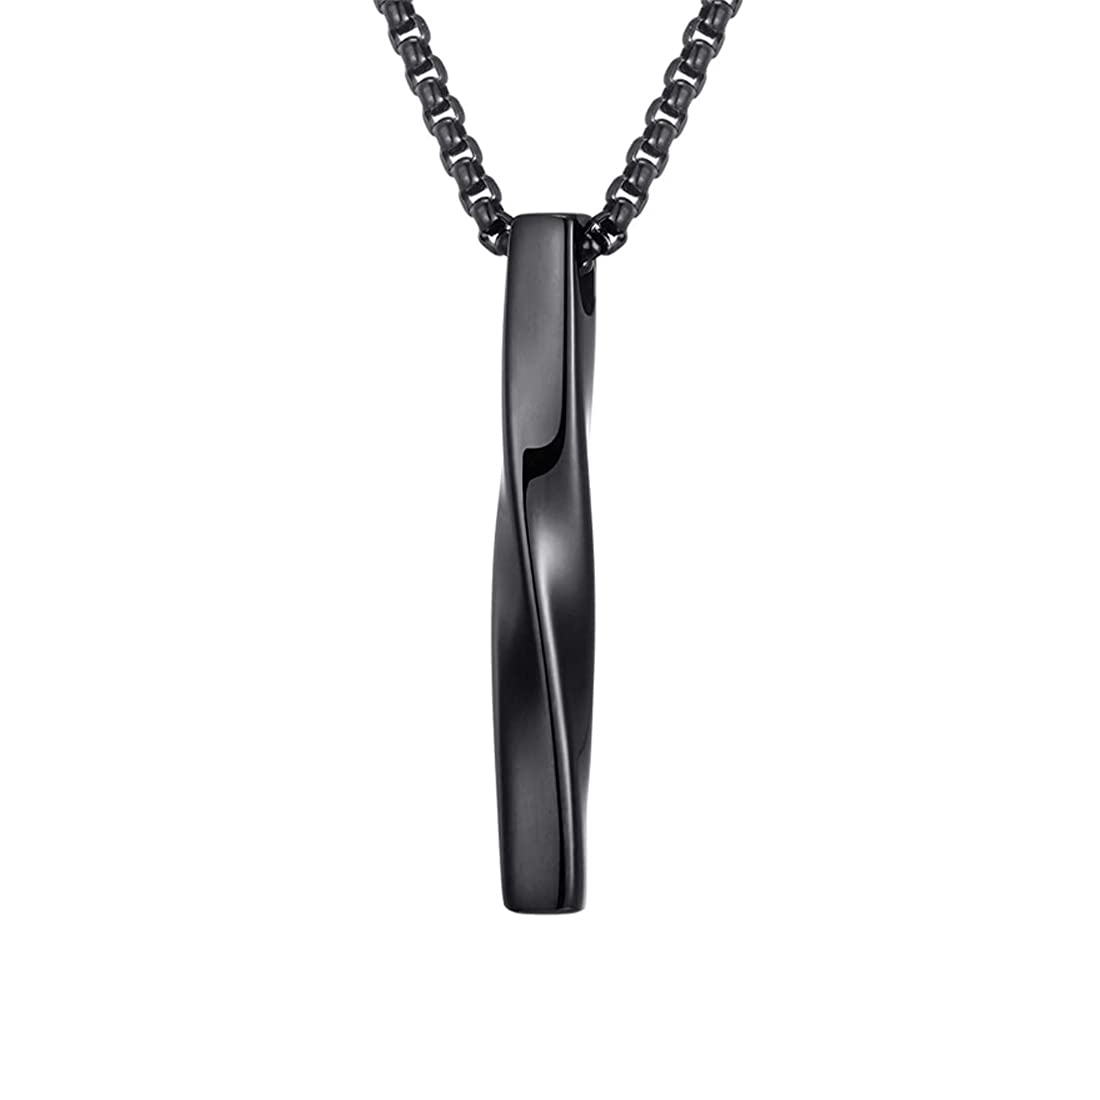 Yellow Chimes Pendant for Men Black Men Pendant Stainless Steel Bar Style With High Polished Chain Pendant for Men and Boys.